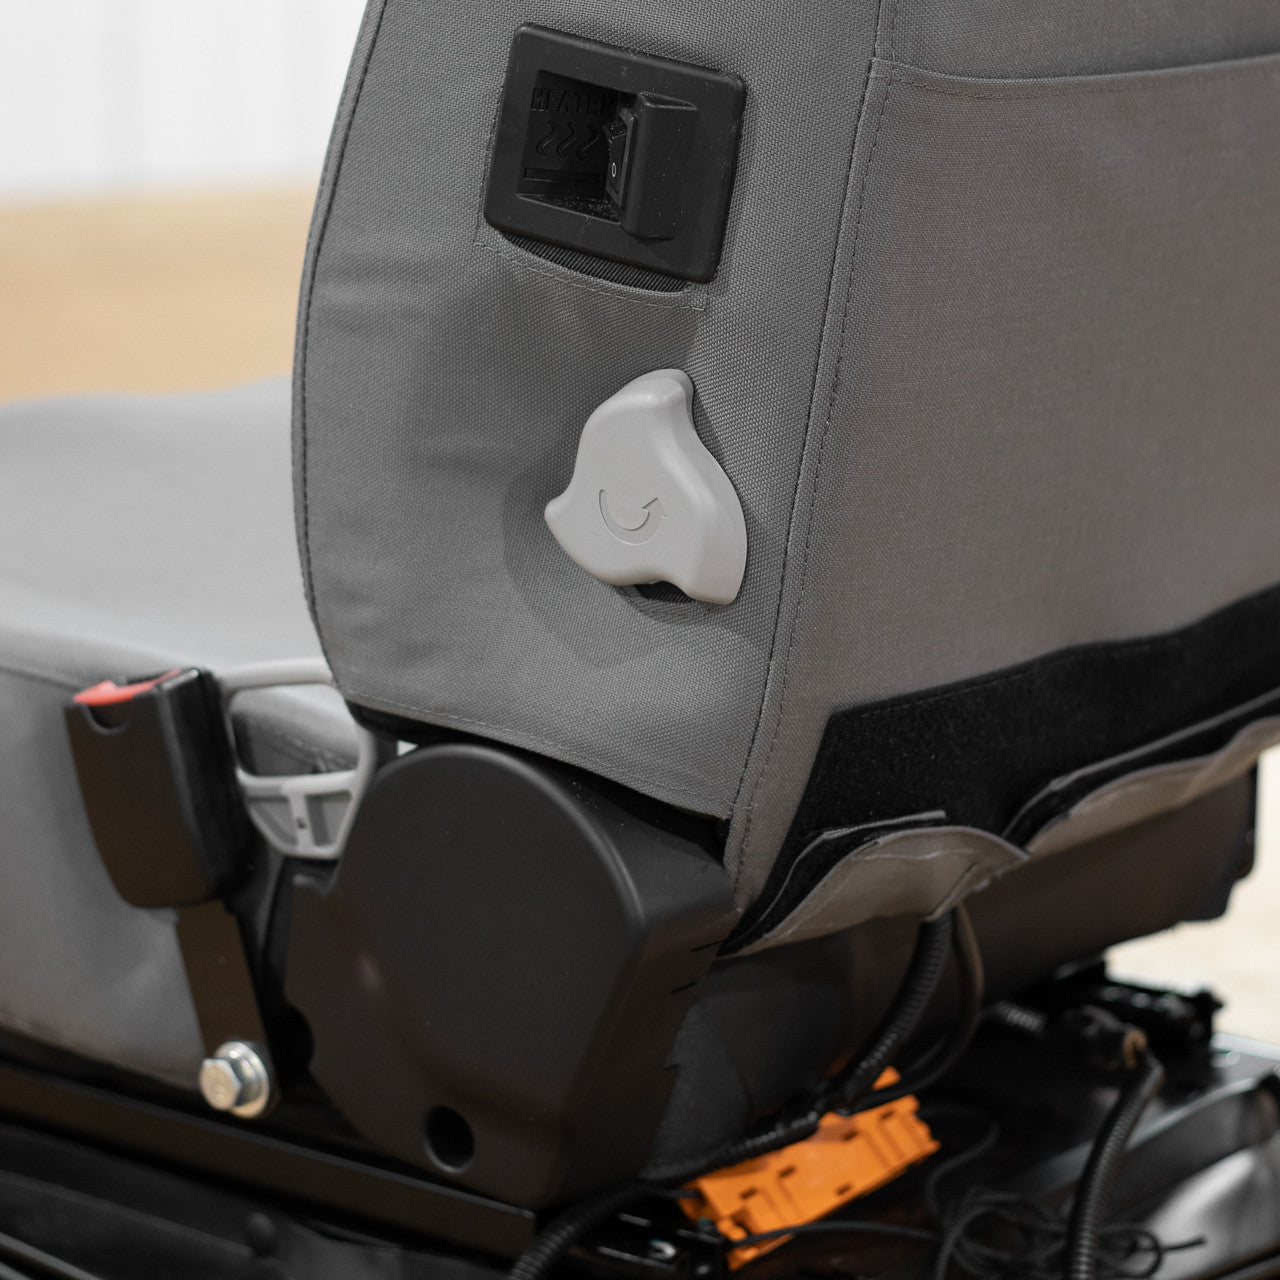 This Case & Link-Belt Excavator Seat Cover works with the existing seat controls